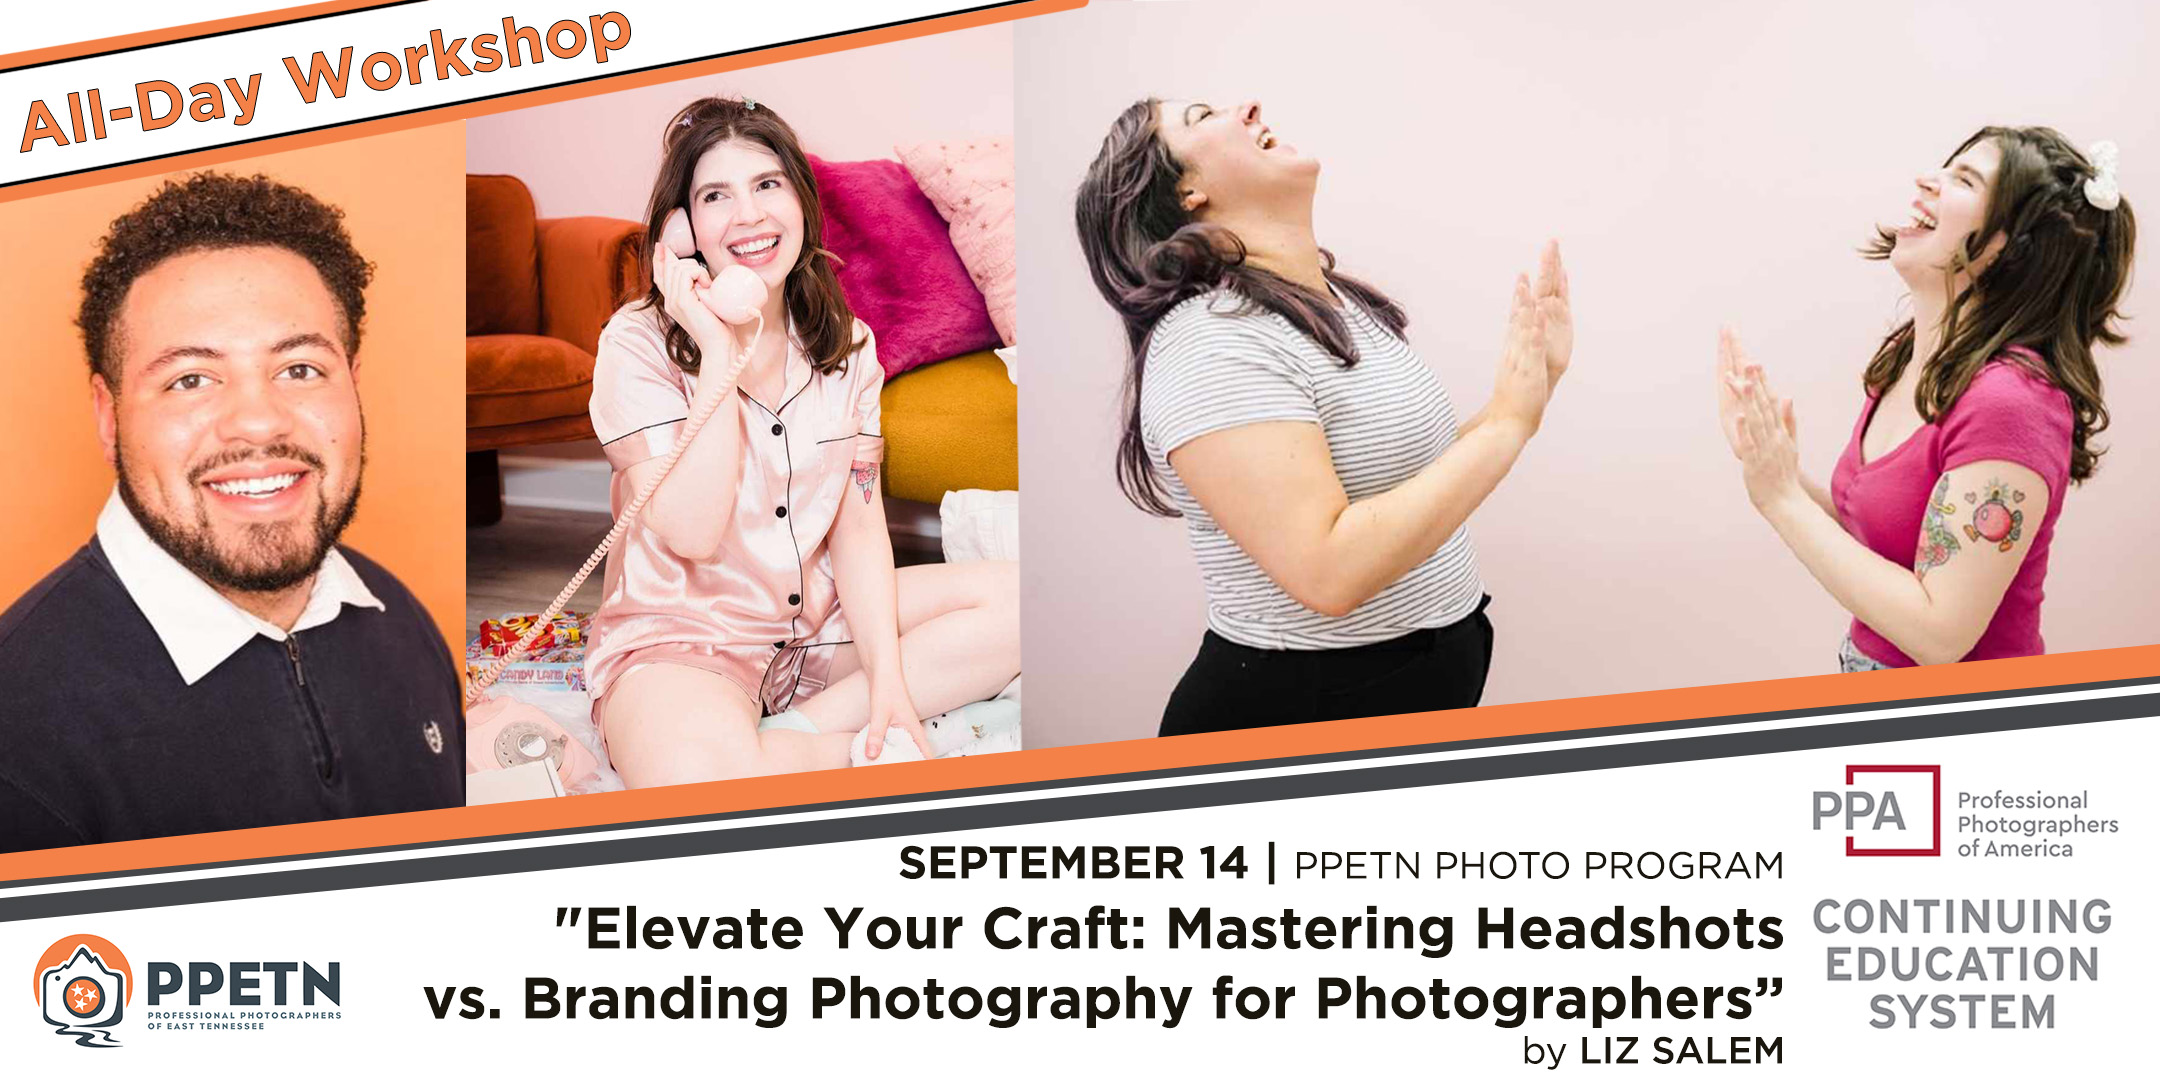 ELEVATE YOUR CRAFT: MASTERING HEADSHOTS vs. BRANDING PHOTOGRAPHY FOR PHOTOGRAPHERS BY LIZ SALEM